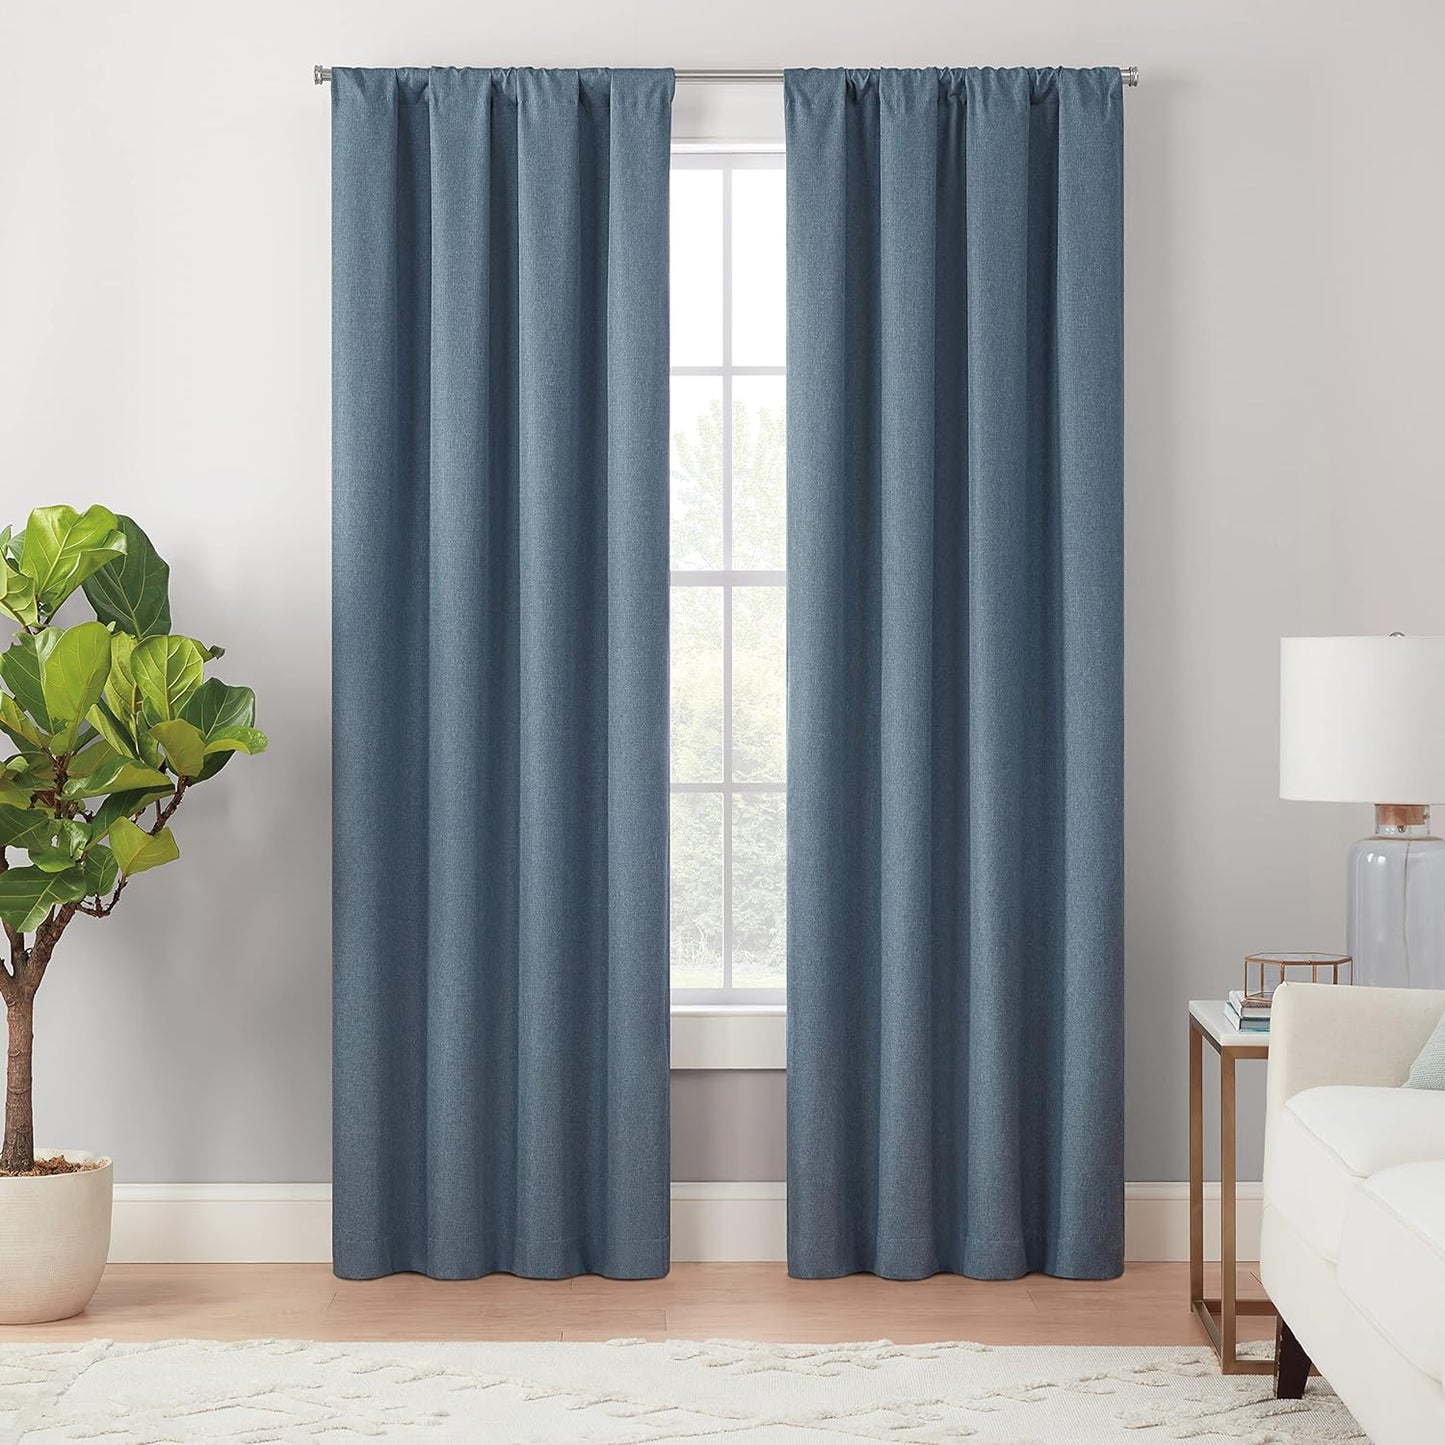 Eclipse Cannes Magnitech 100% Blackout Curtain, Rod Pocket Window Curtain Panel, Seamless Magnetic Closure for Bedroom, Living Room or Nursery, 63 in Long X 40 in Wide, (1 Panel), Natural/ Linen  KEECO Denim Rod Pocket 40X84